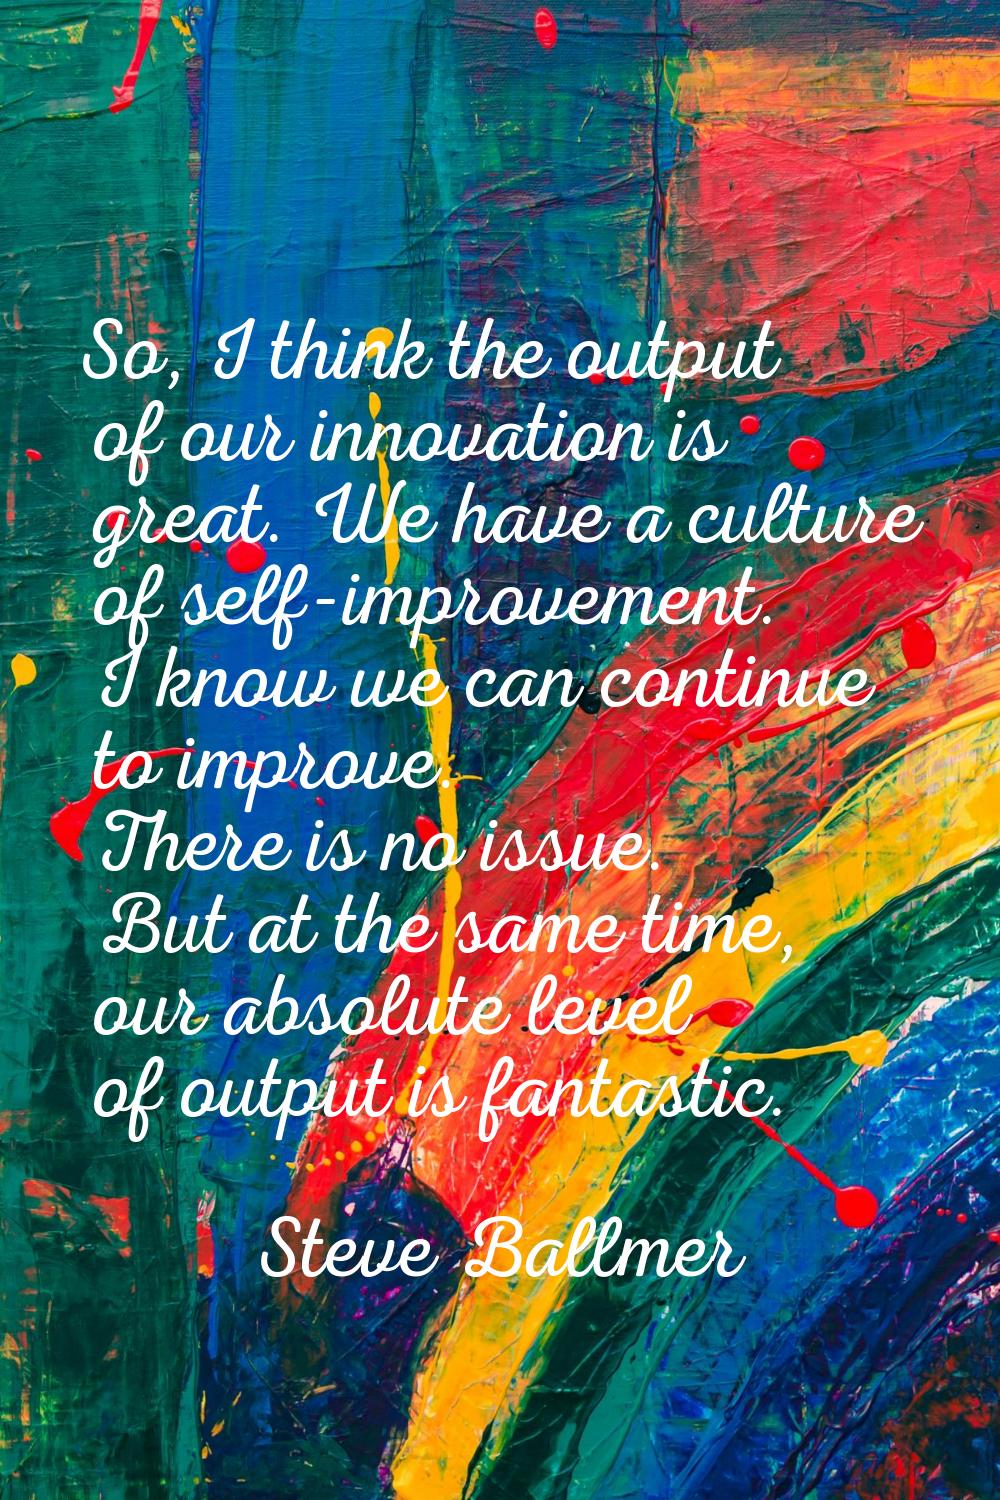 So, I think the output of our innovation is great. We have a culture of self-improvement. I know we